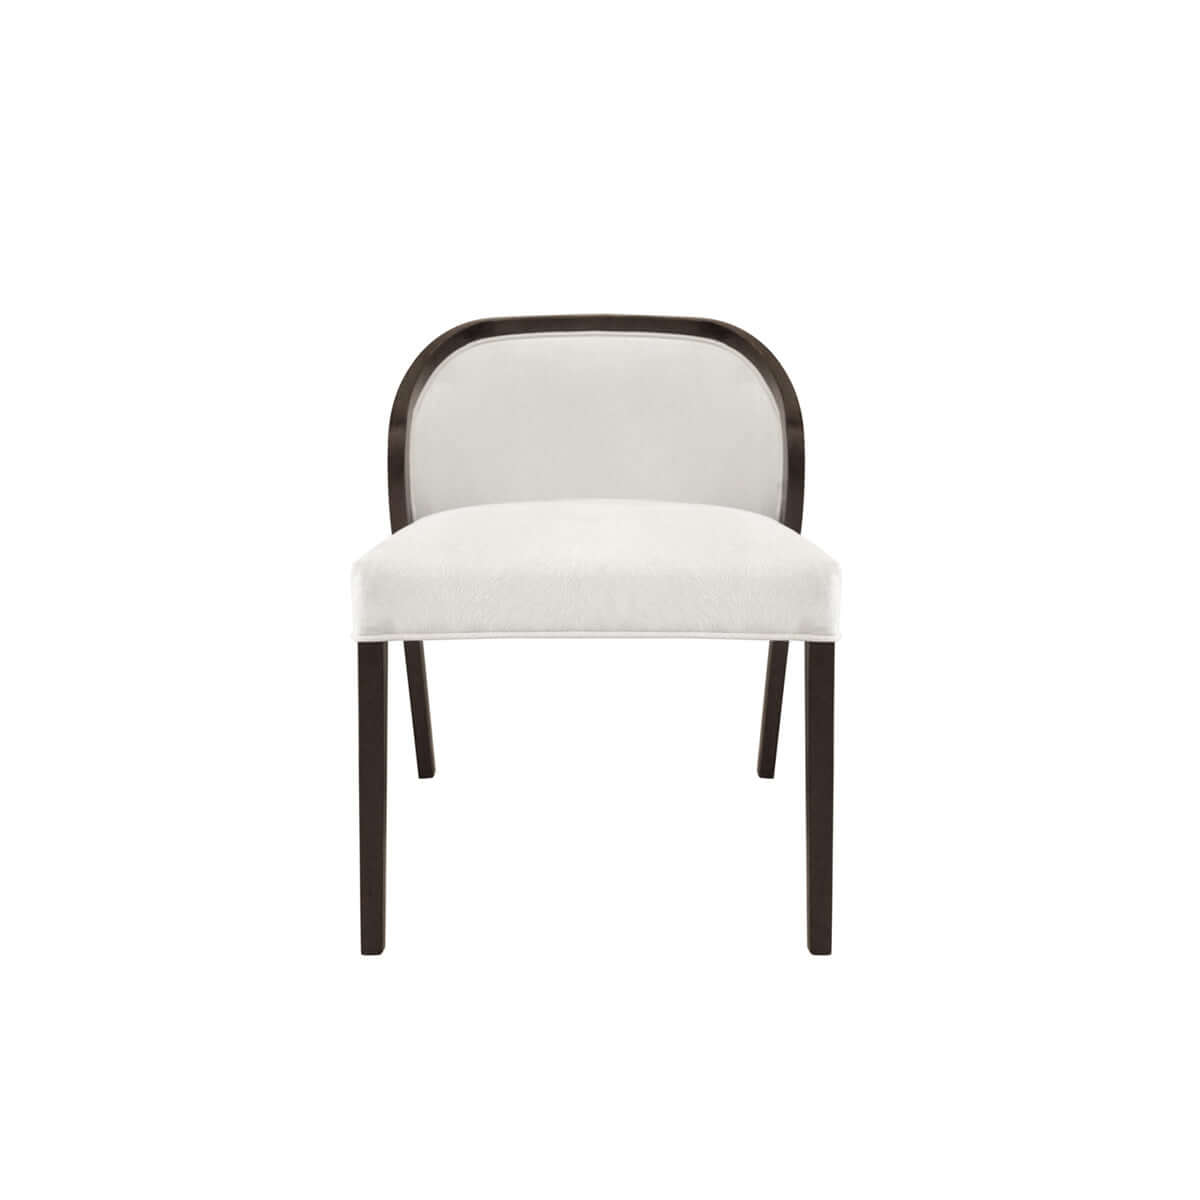 armless dining chair with low back and glossy wooden trim